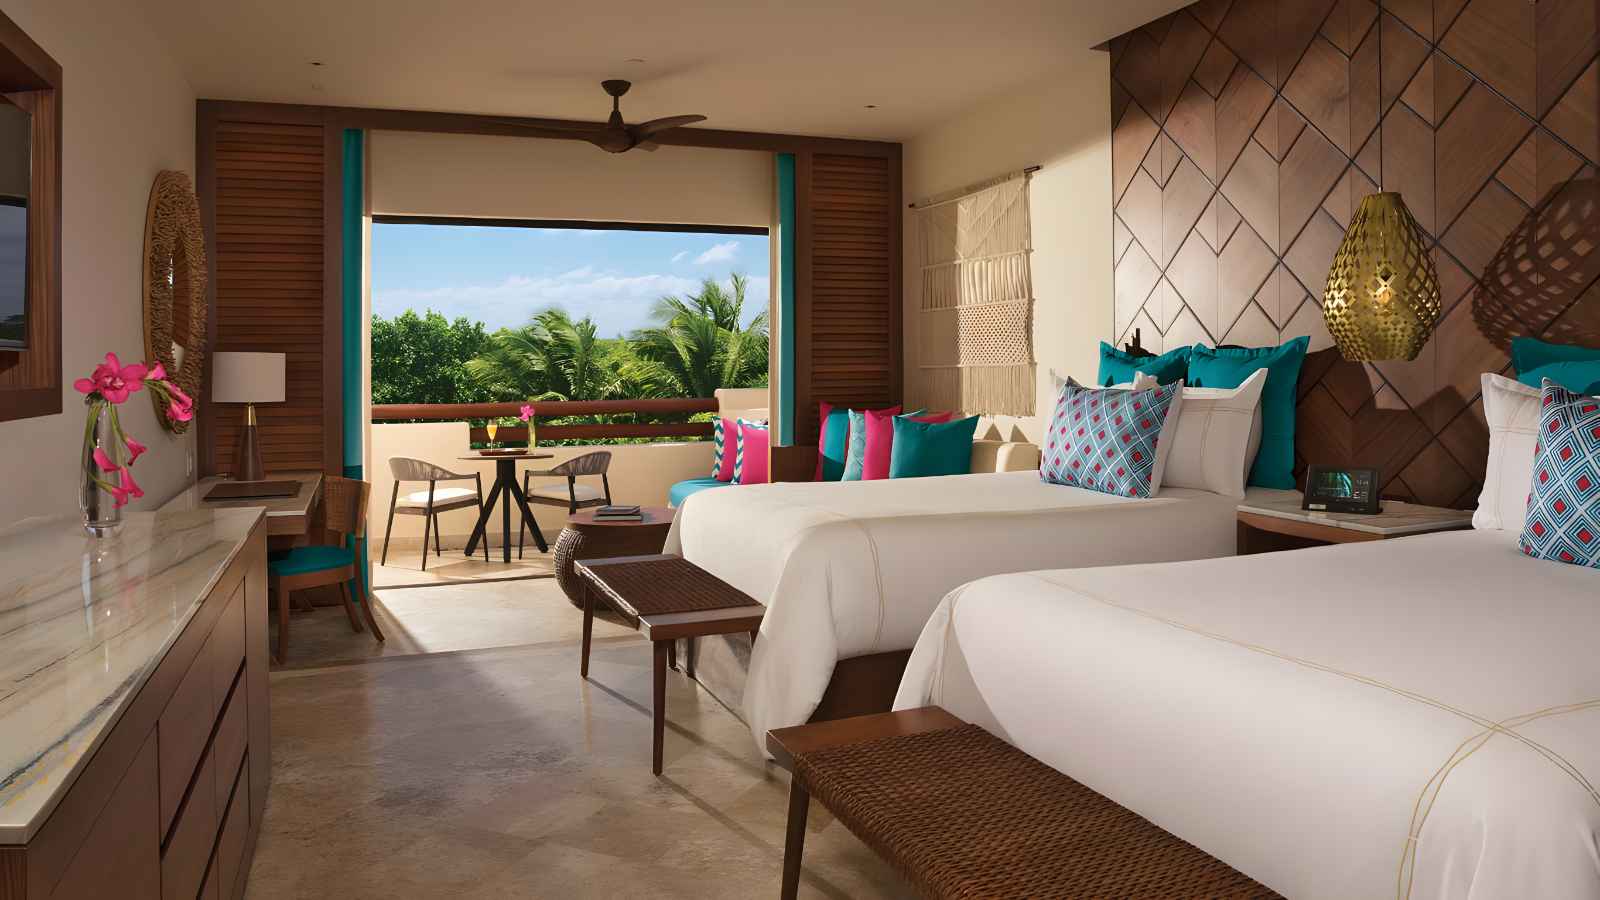 Secrets Maroma Beach, one of the top Cancun all inclusive resorts.